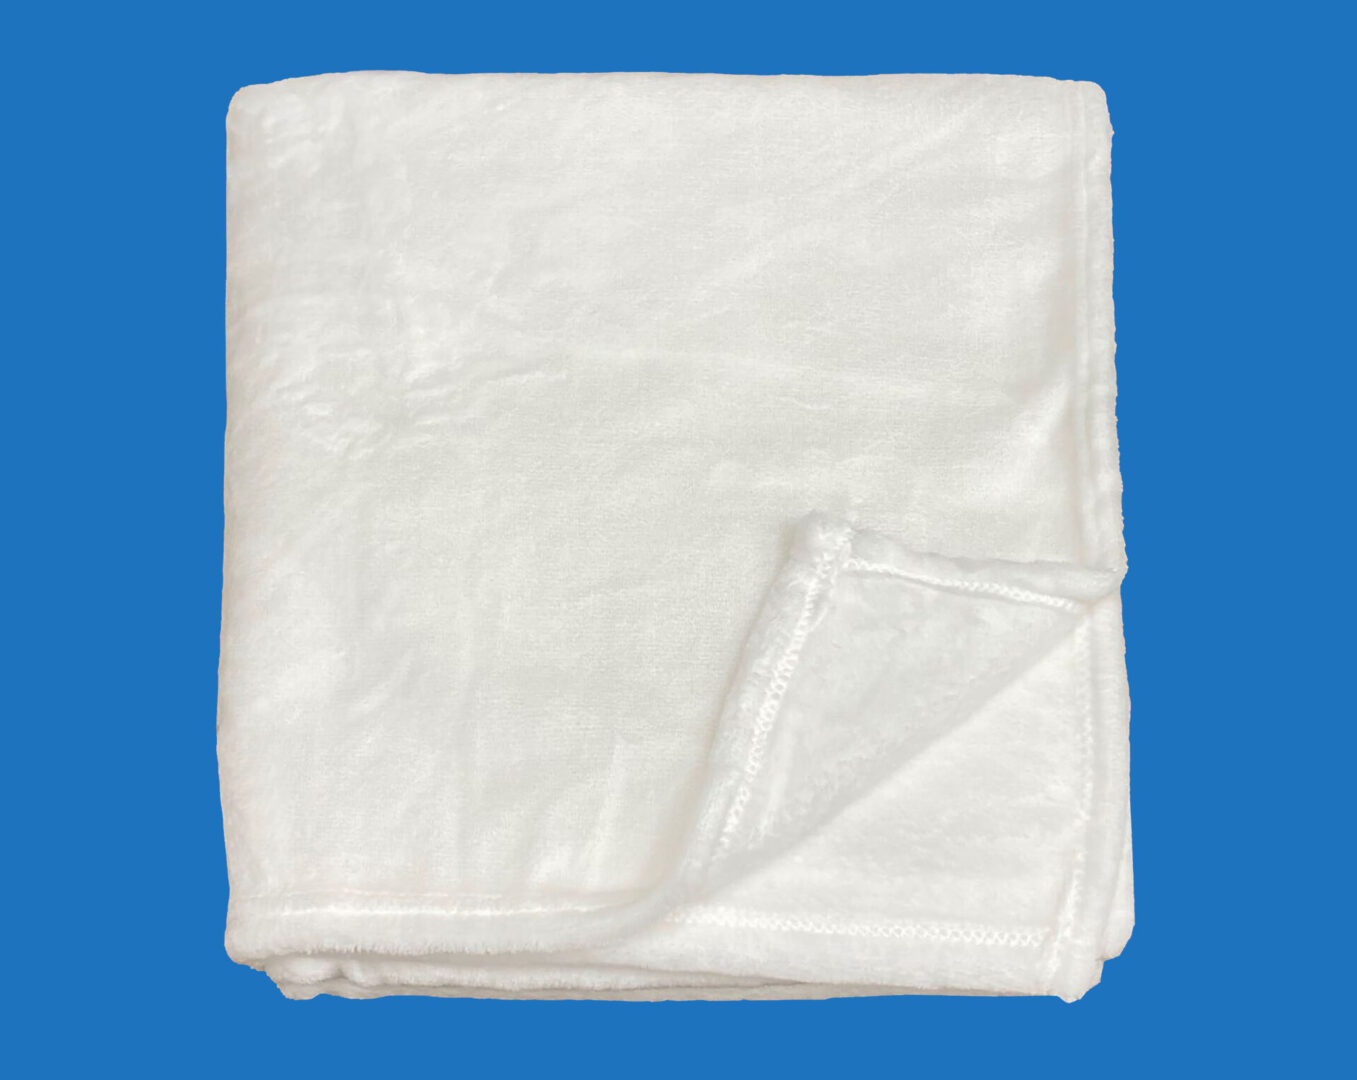 A Folded White Fluffy Blanket With Stitched Edges